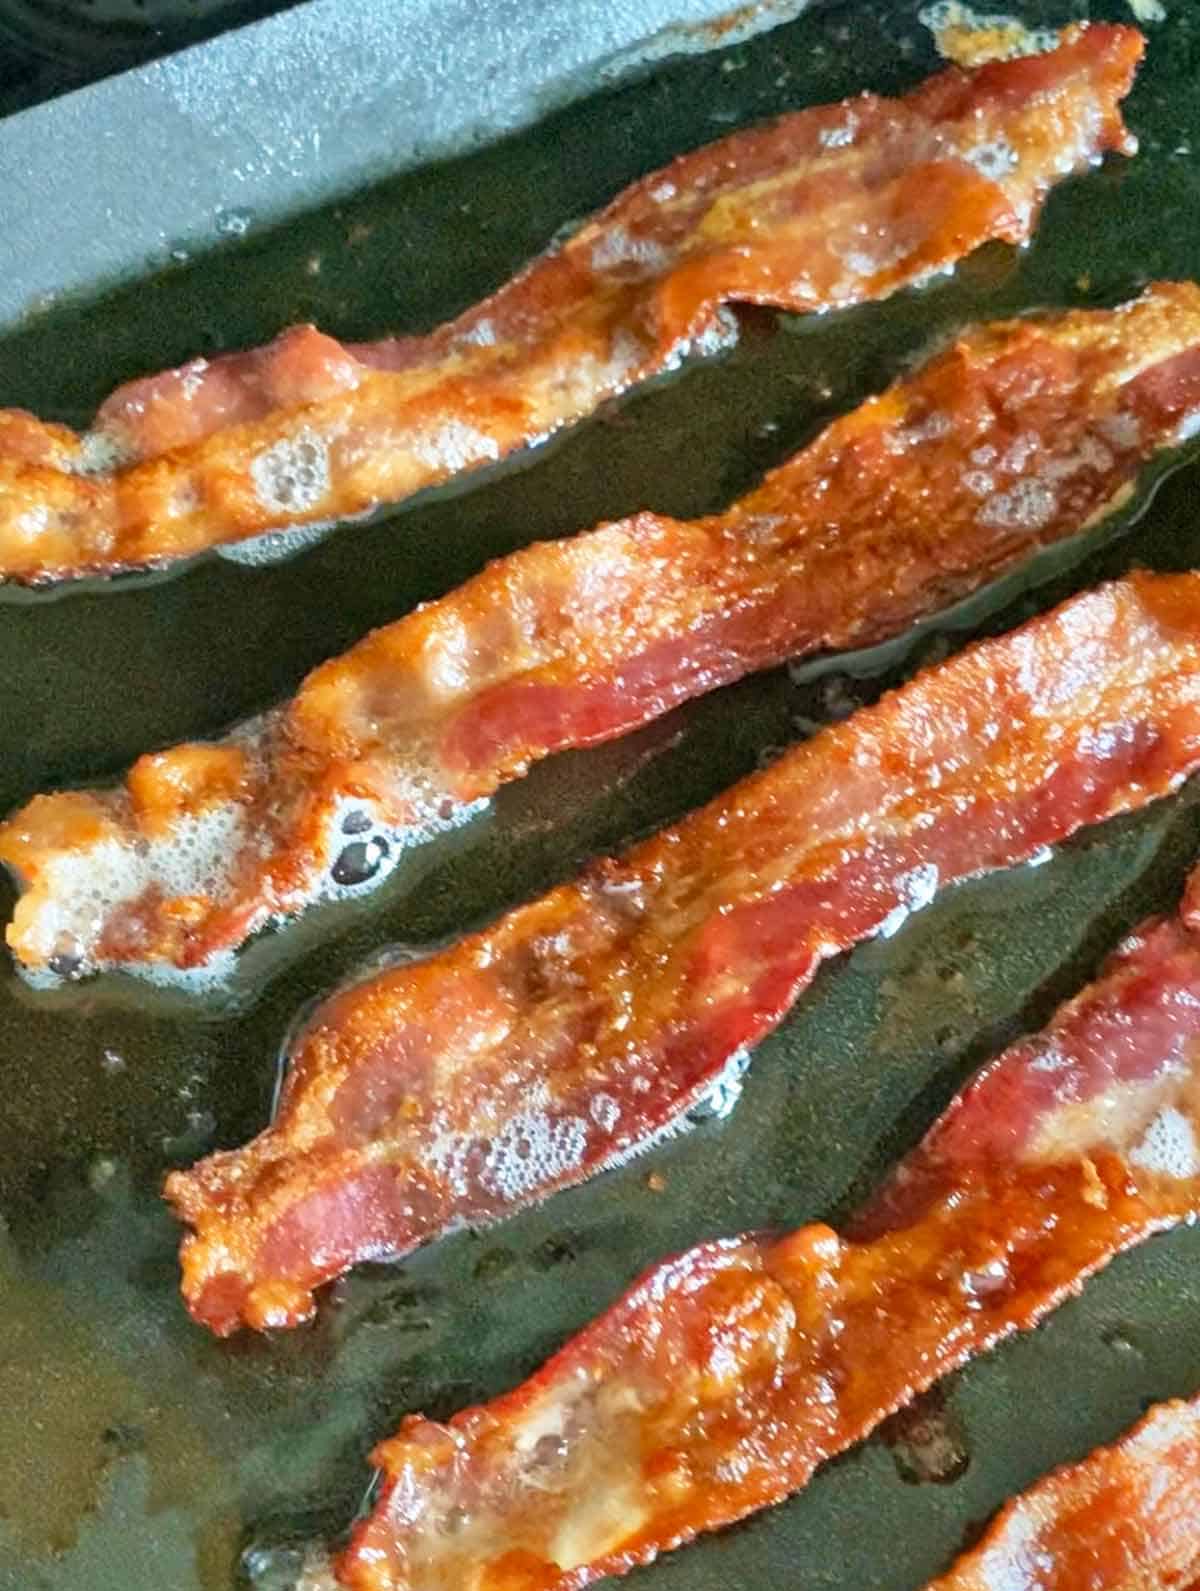 Five crispy bacon slices cooked in a square cast iron pan.